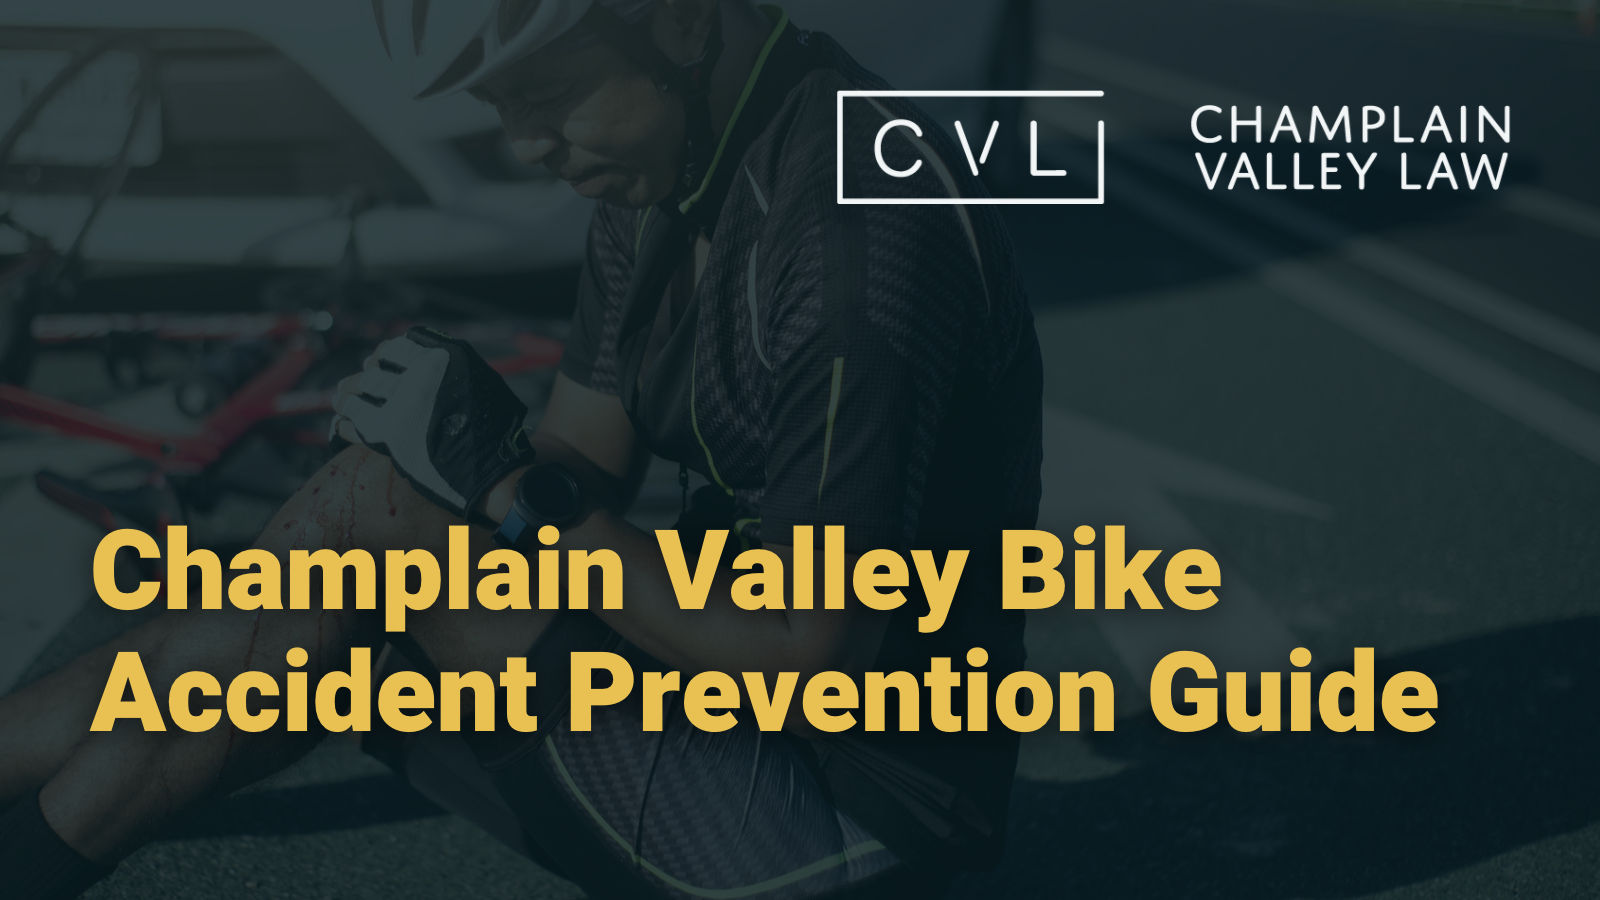 Champlain Valley Bike Accident Prevention Guide in vermont - Champlain Valley Law - Attorney Drew Palcsik